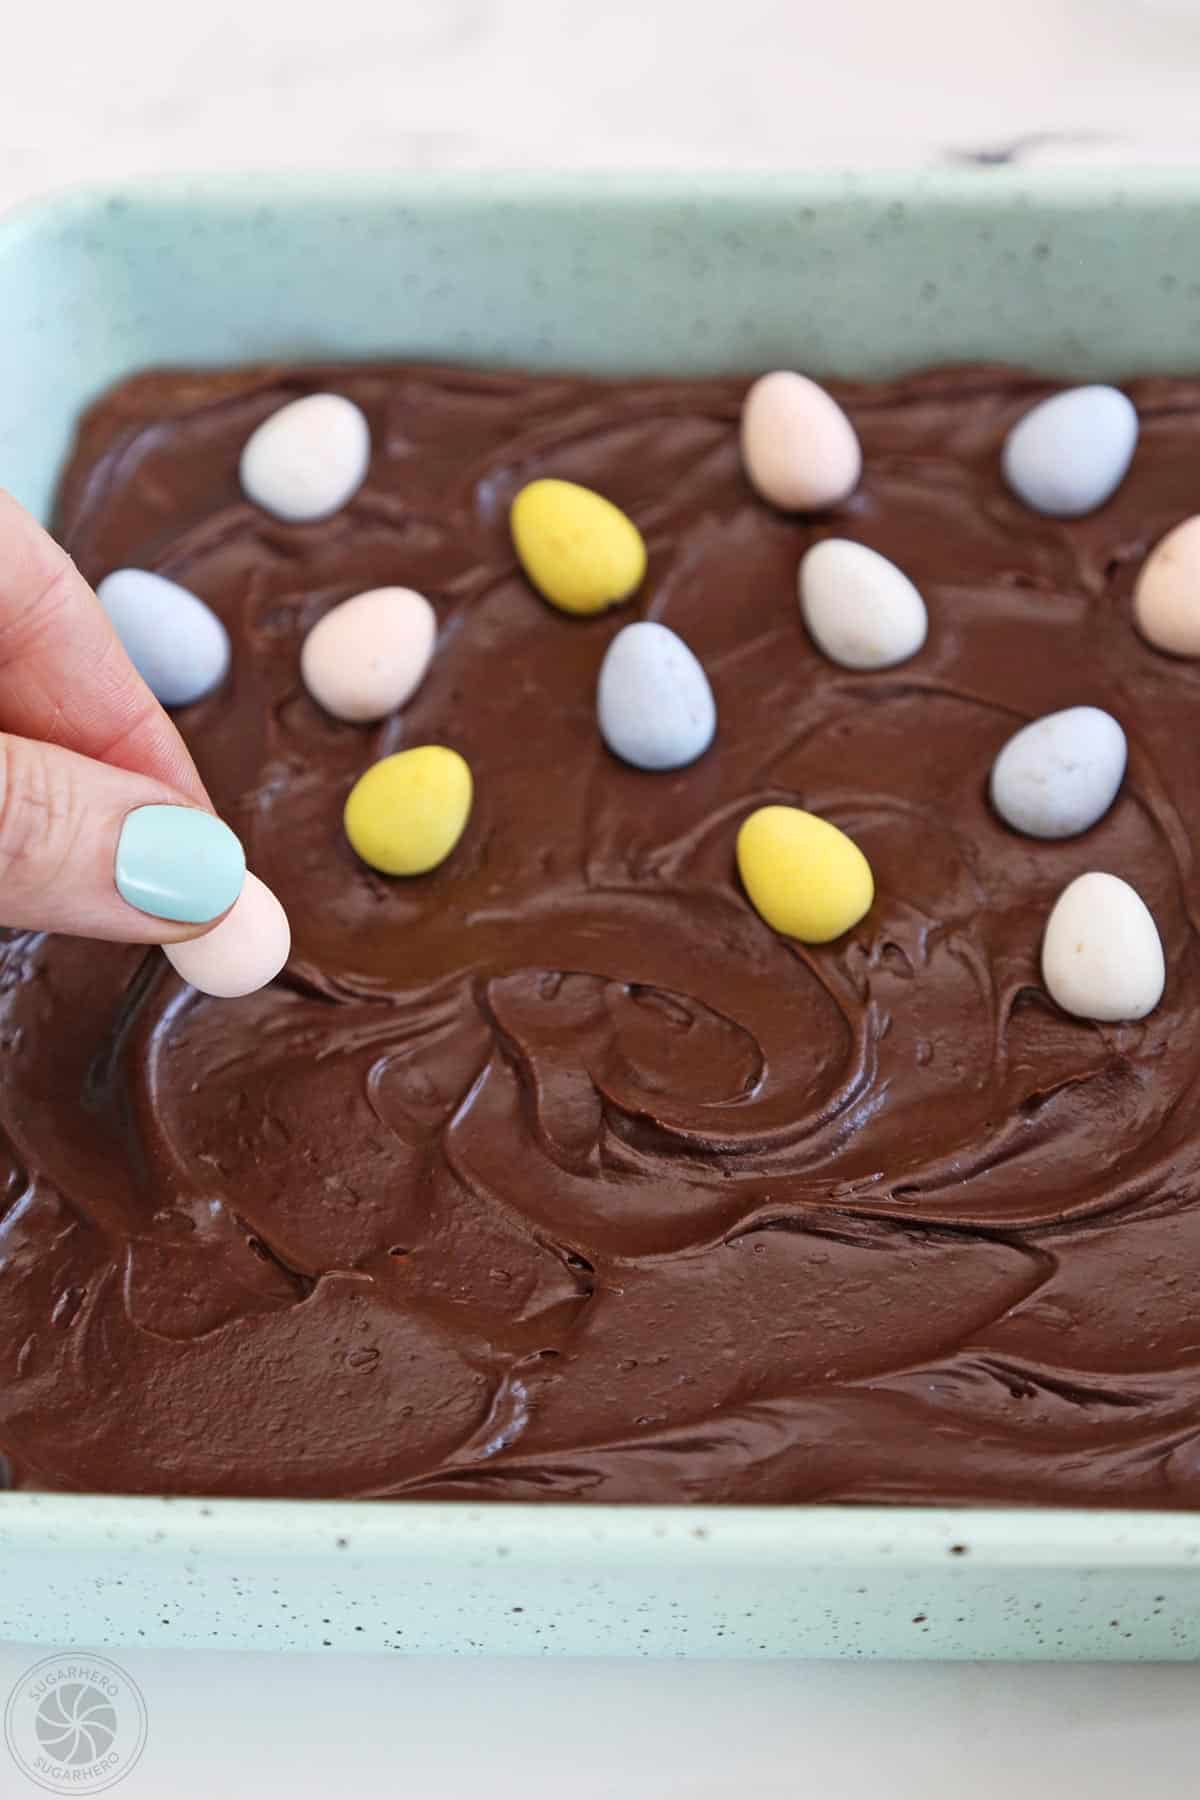 Placing colorful Cadbury mini eggs on top of frosted brownies.